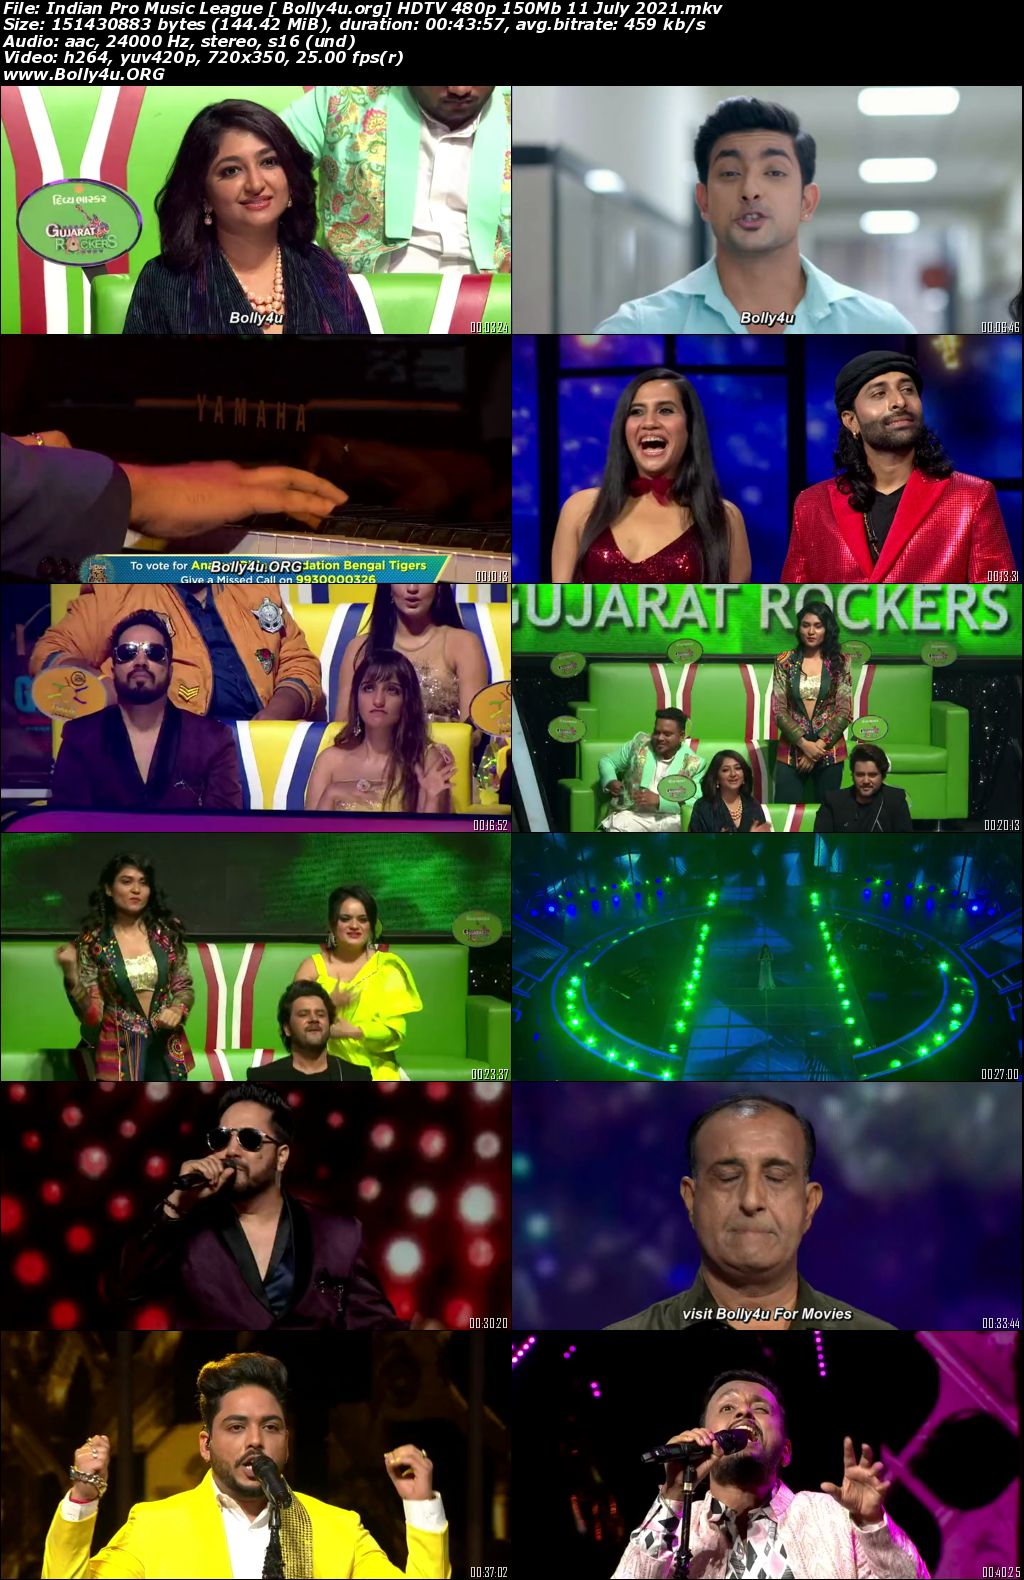 Indian Pro Music League HDTV 480p 150Mb 11 July 2021 Download